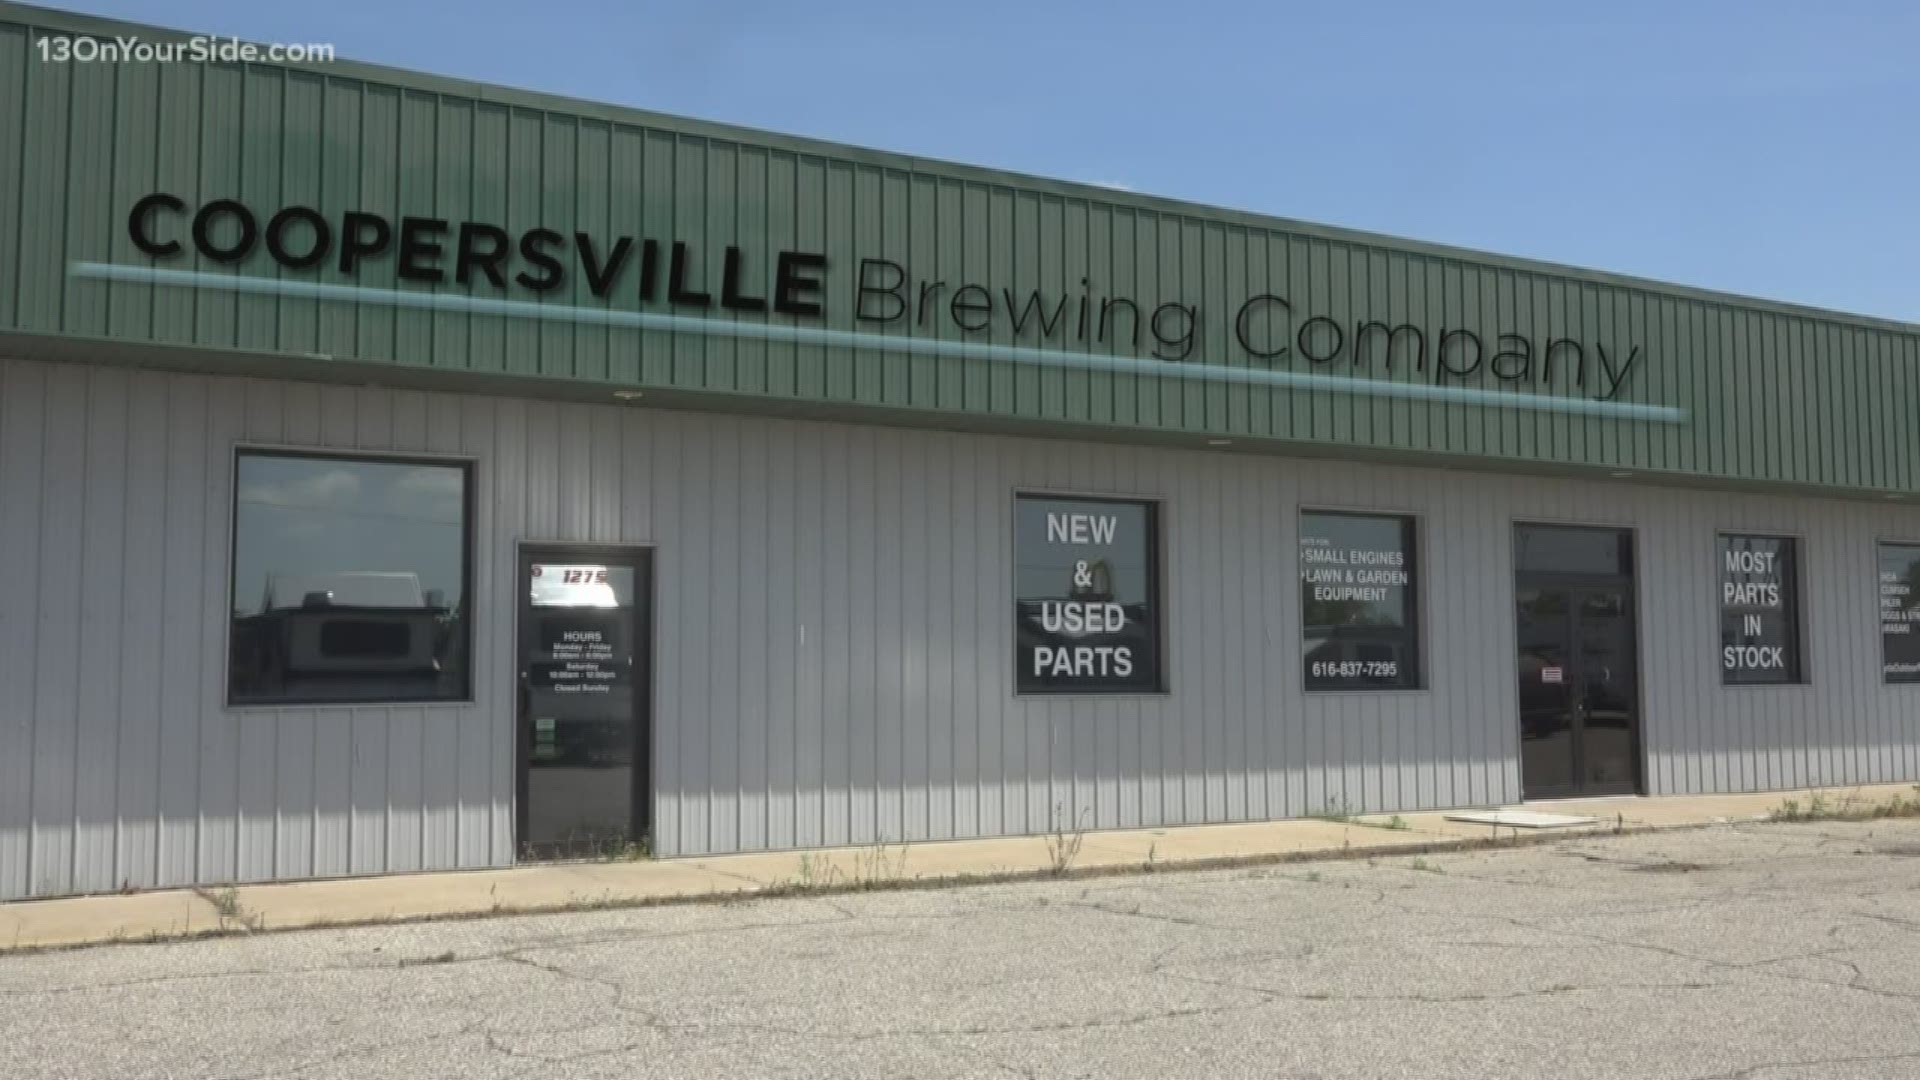 Coopersville planning for first brewery